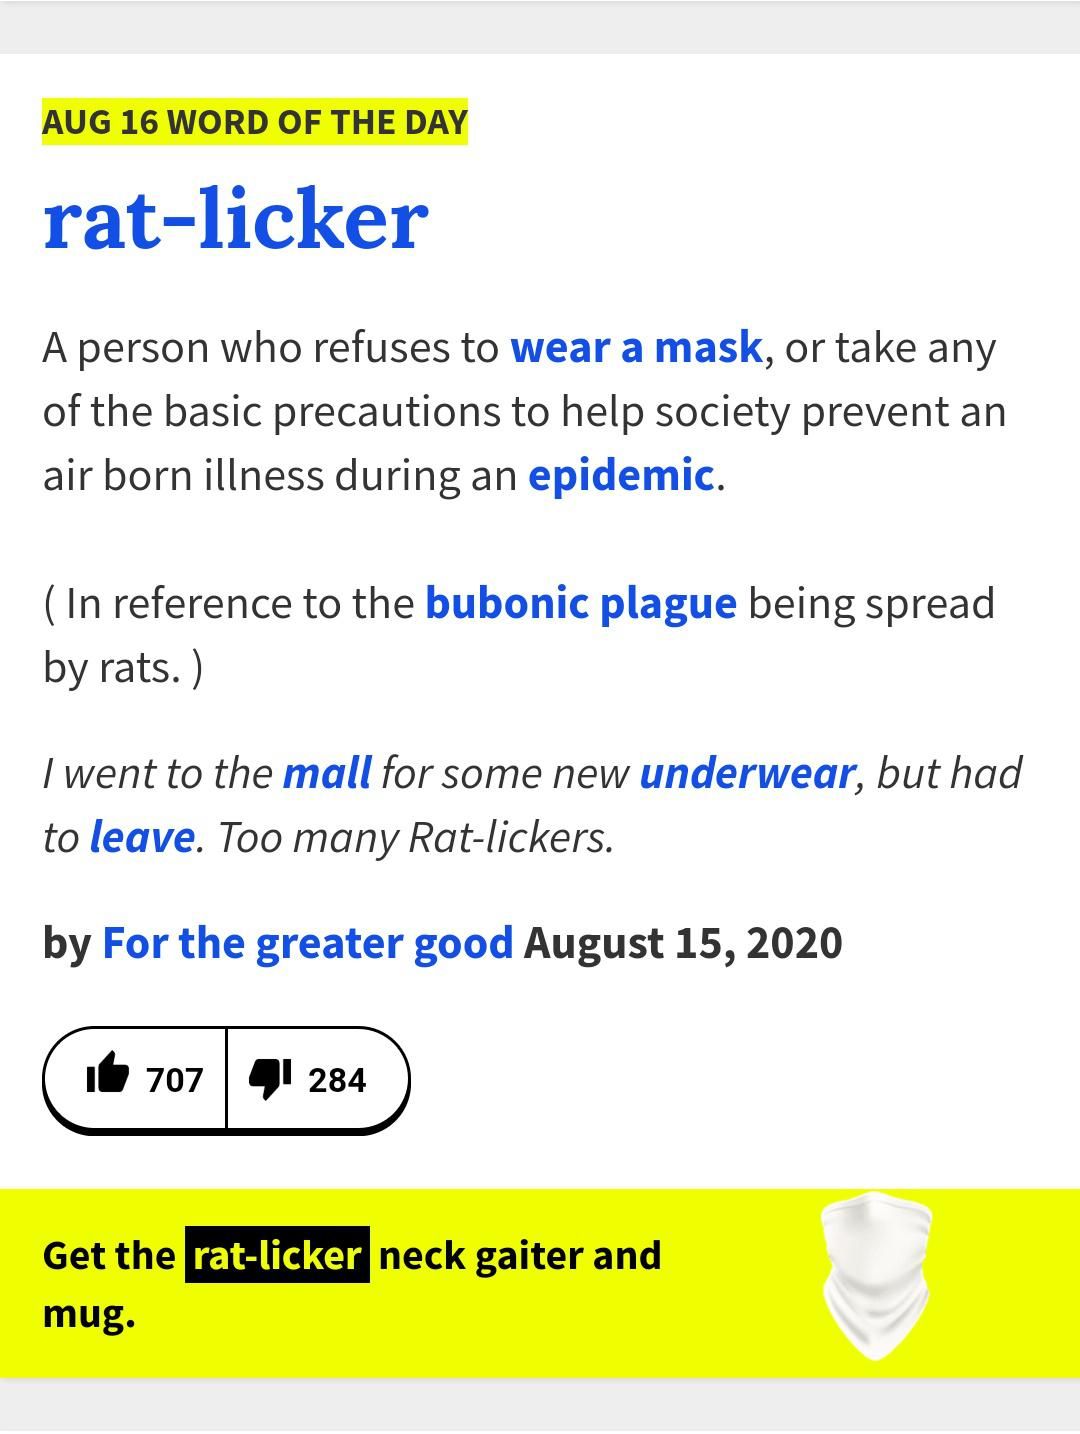 Thought Urban Dictionary's Word of the Day was pretty funny